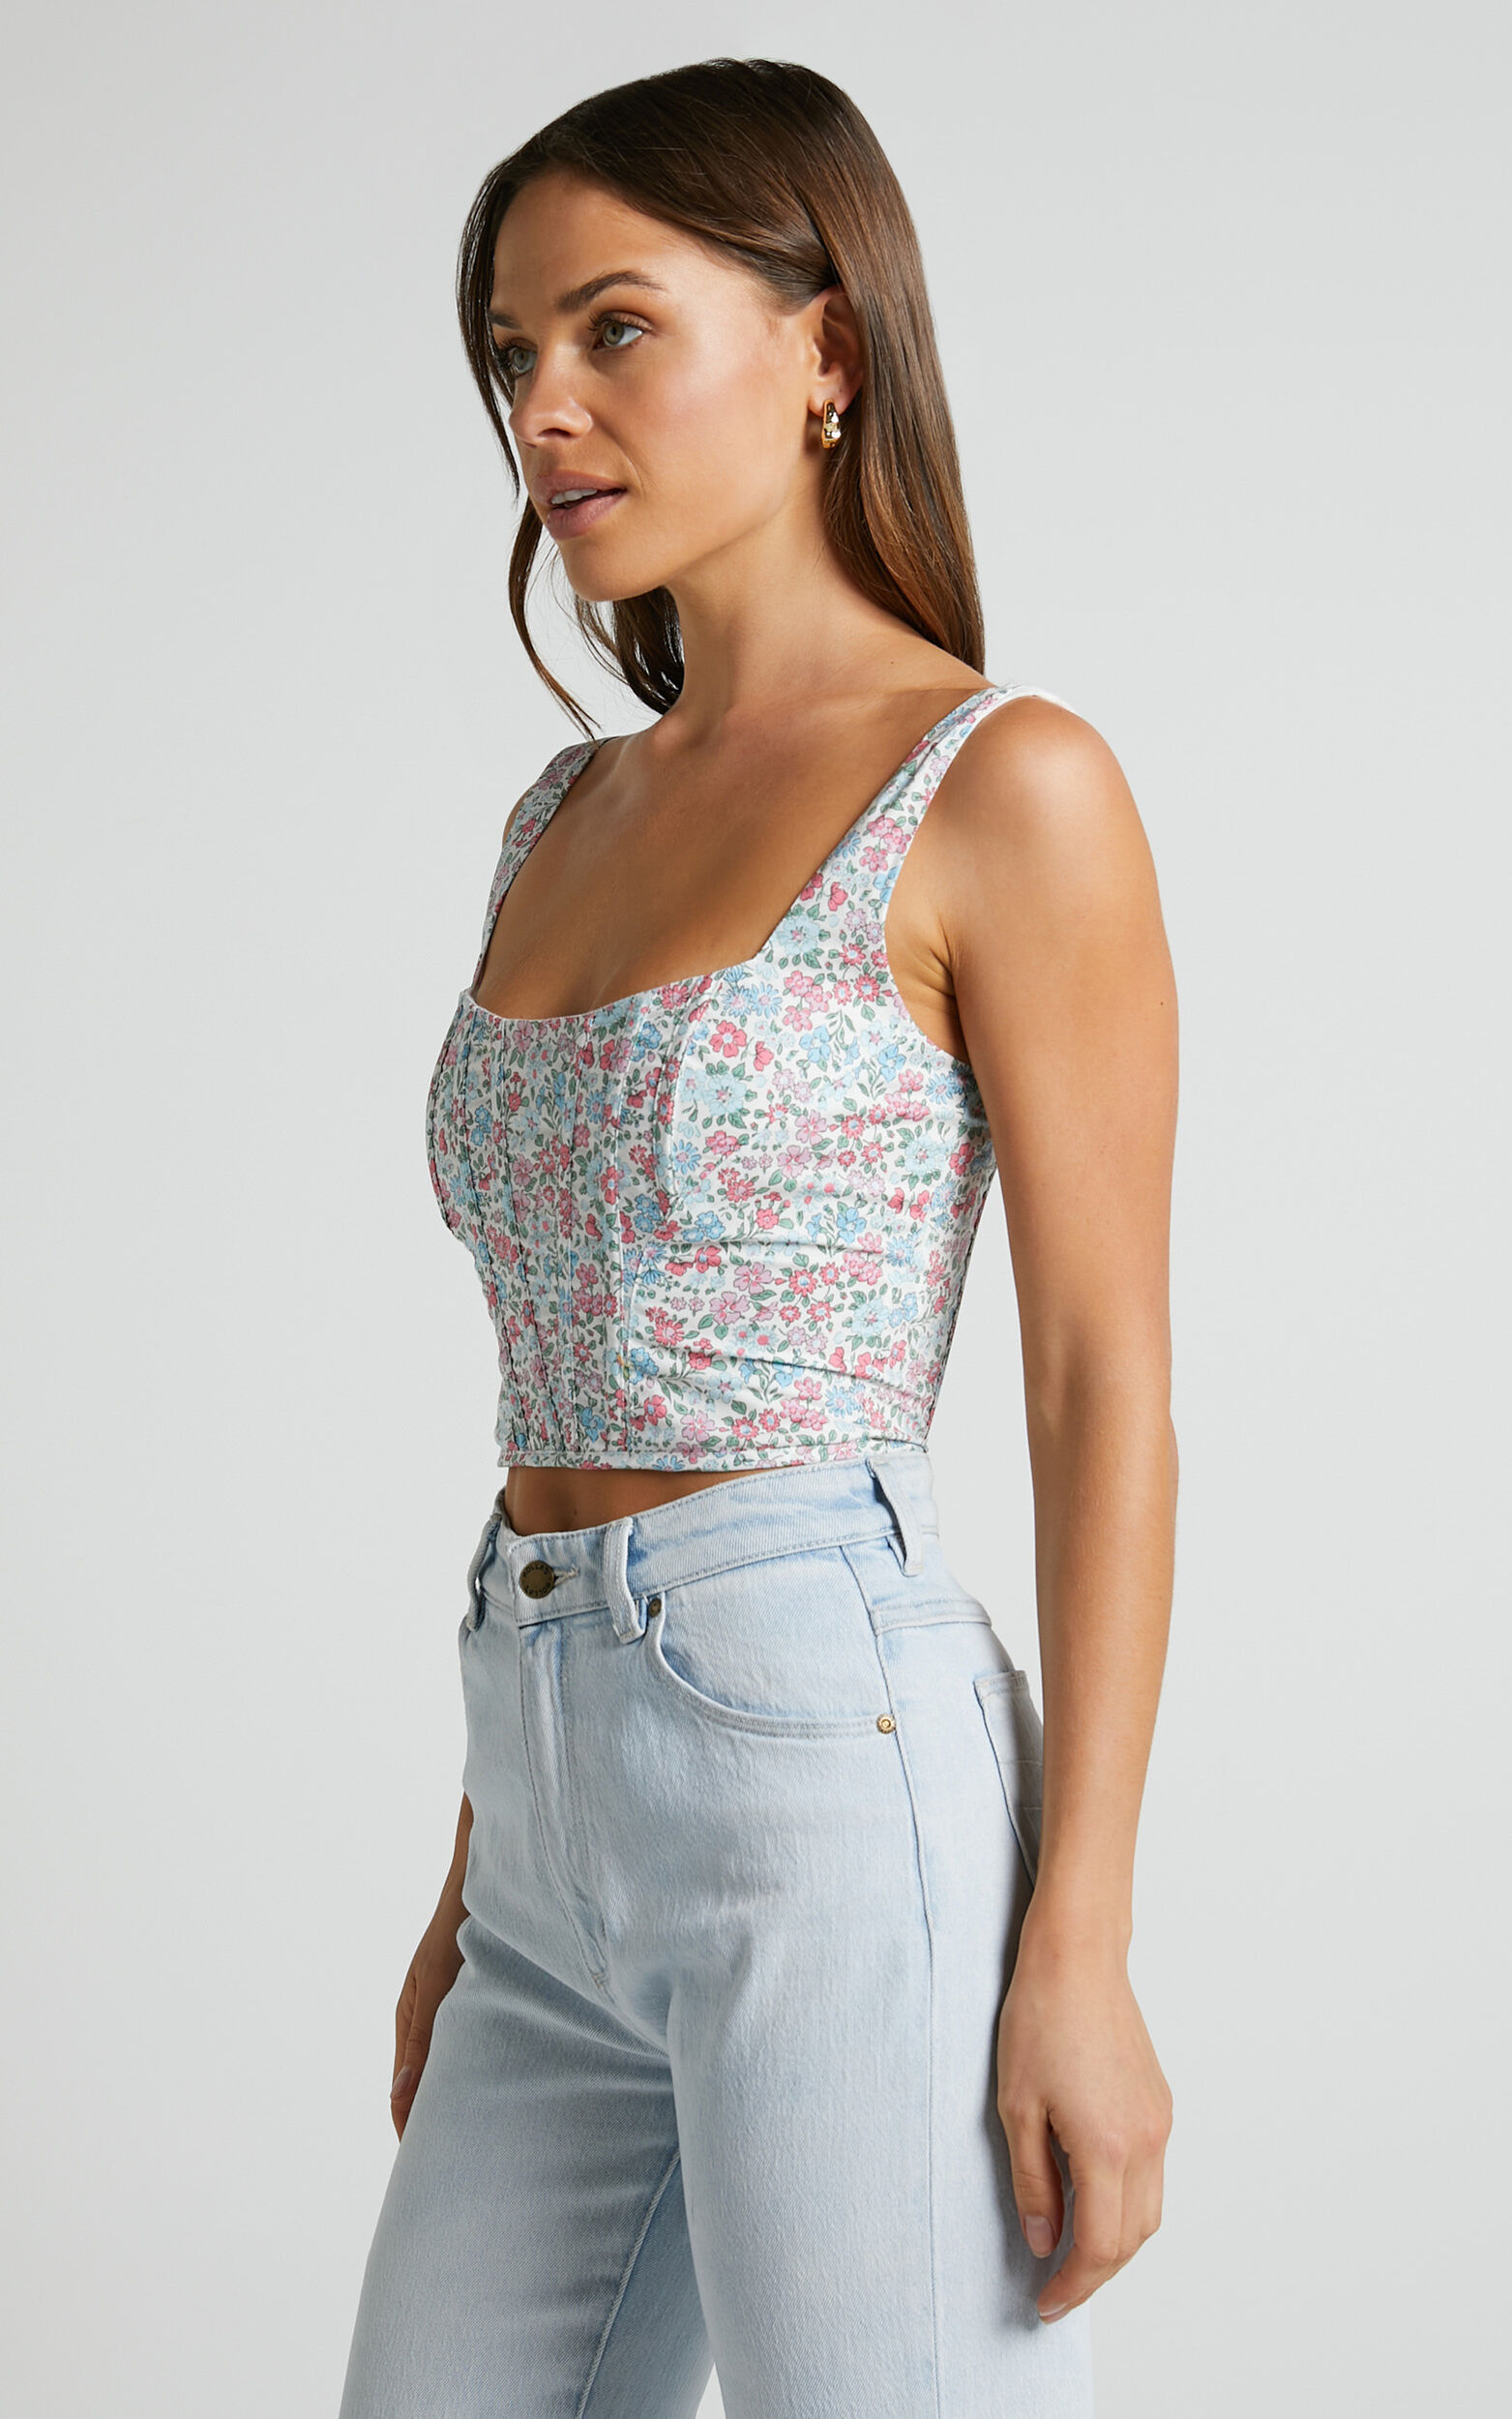 Women's Floral Sequin Square Neck Cropped Cami